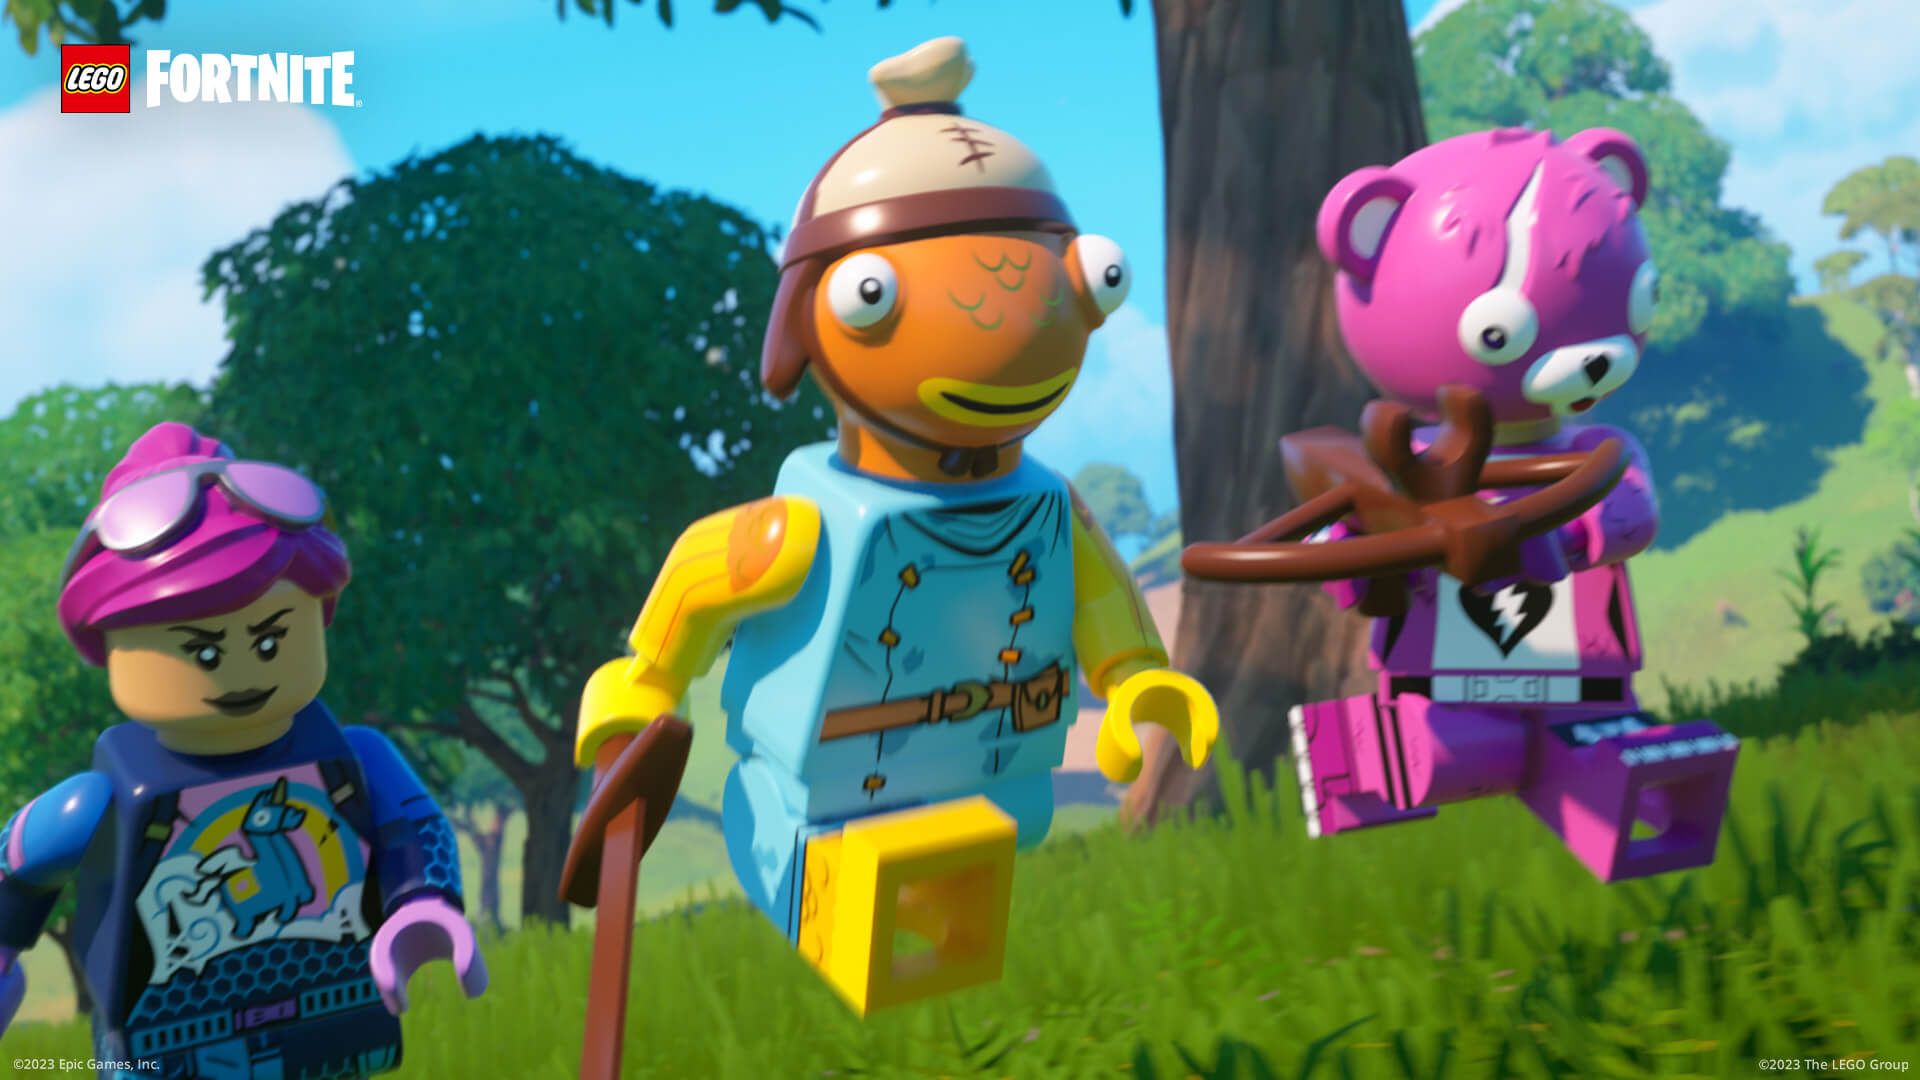 Three Lego Fortnite characters running towards the screen.